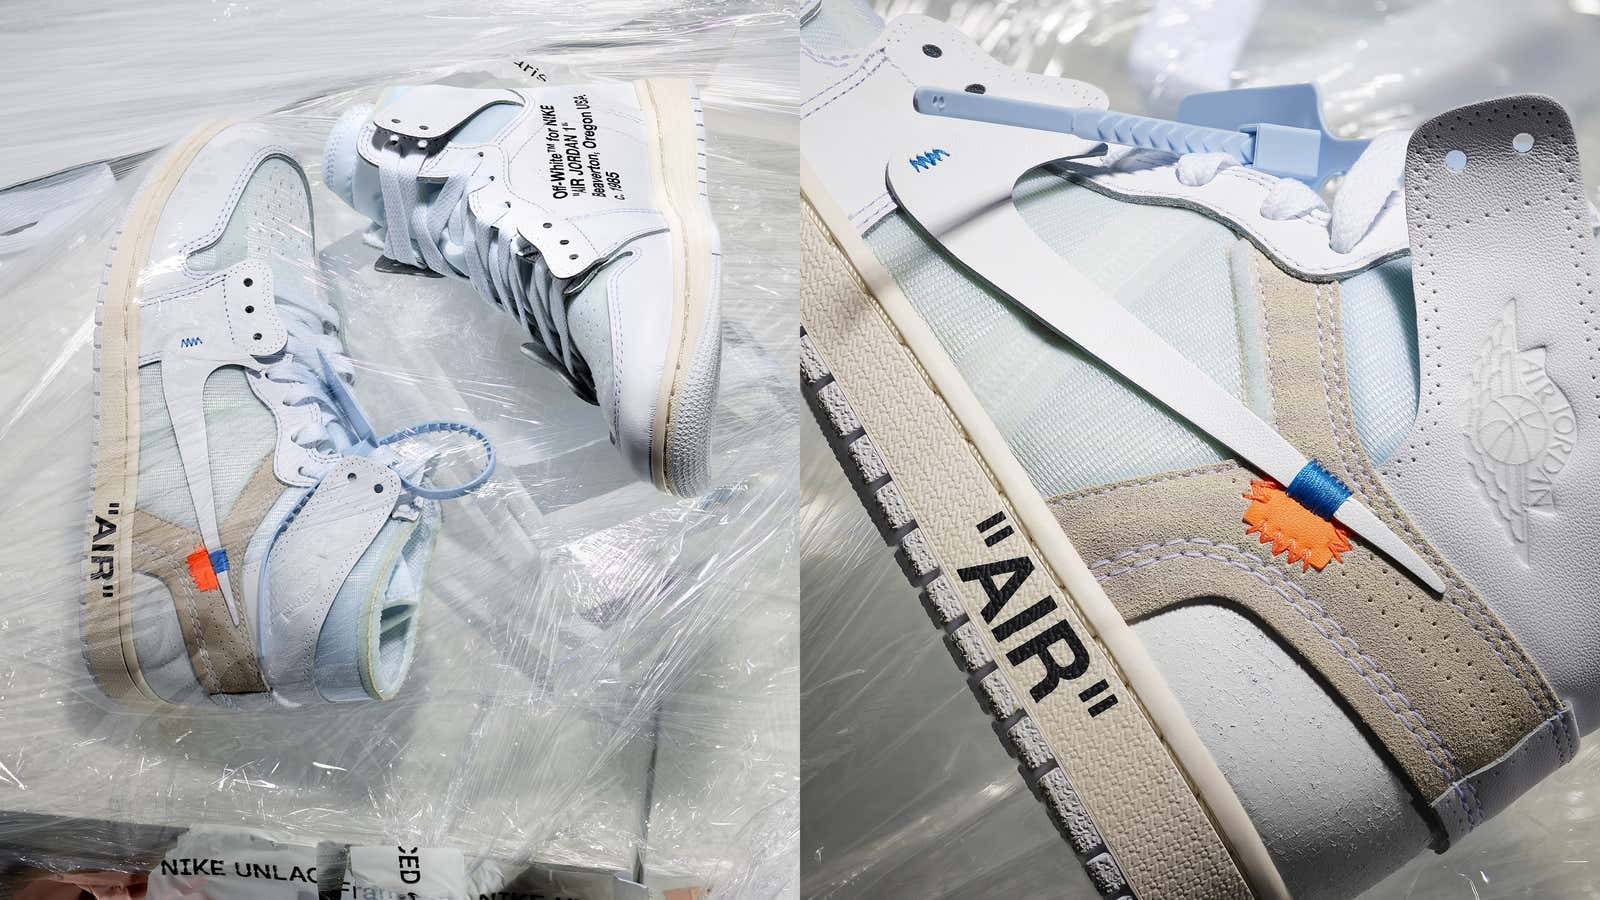 Jordan 1s from Nike’s “The Ten” collaboration with Virgil Abloh, now coming in in more sizes for women.